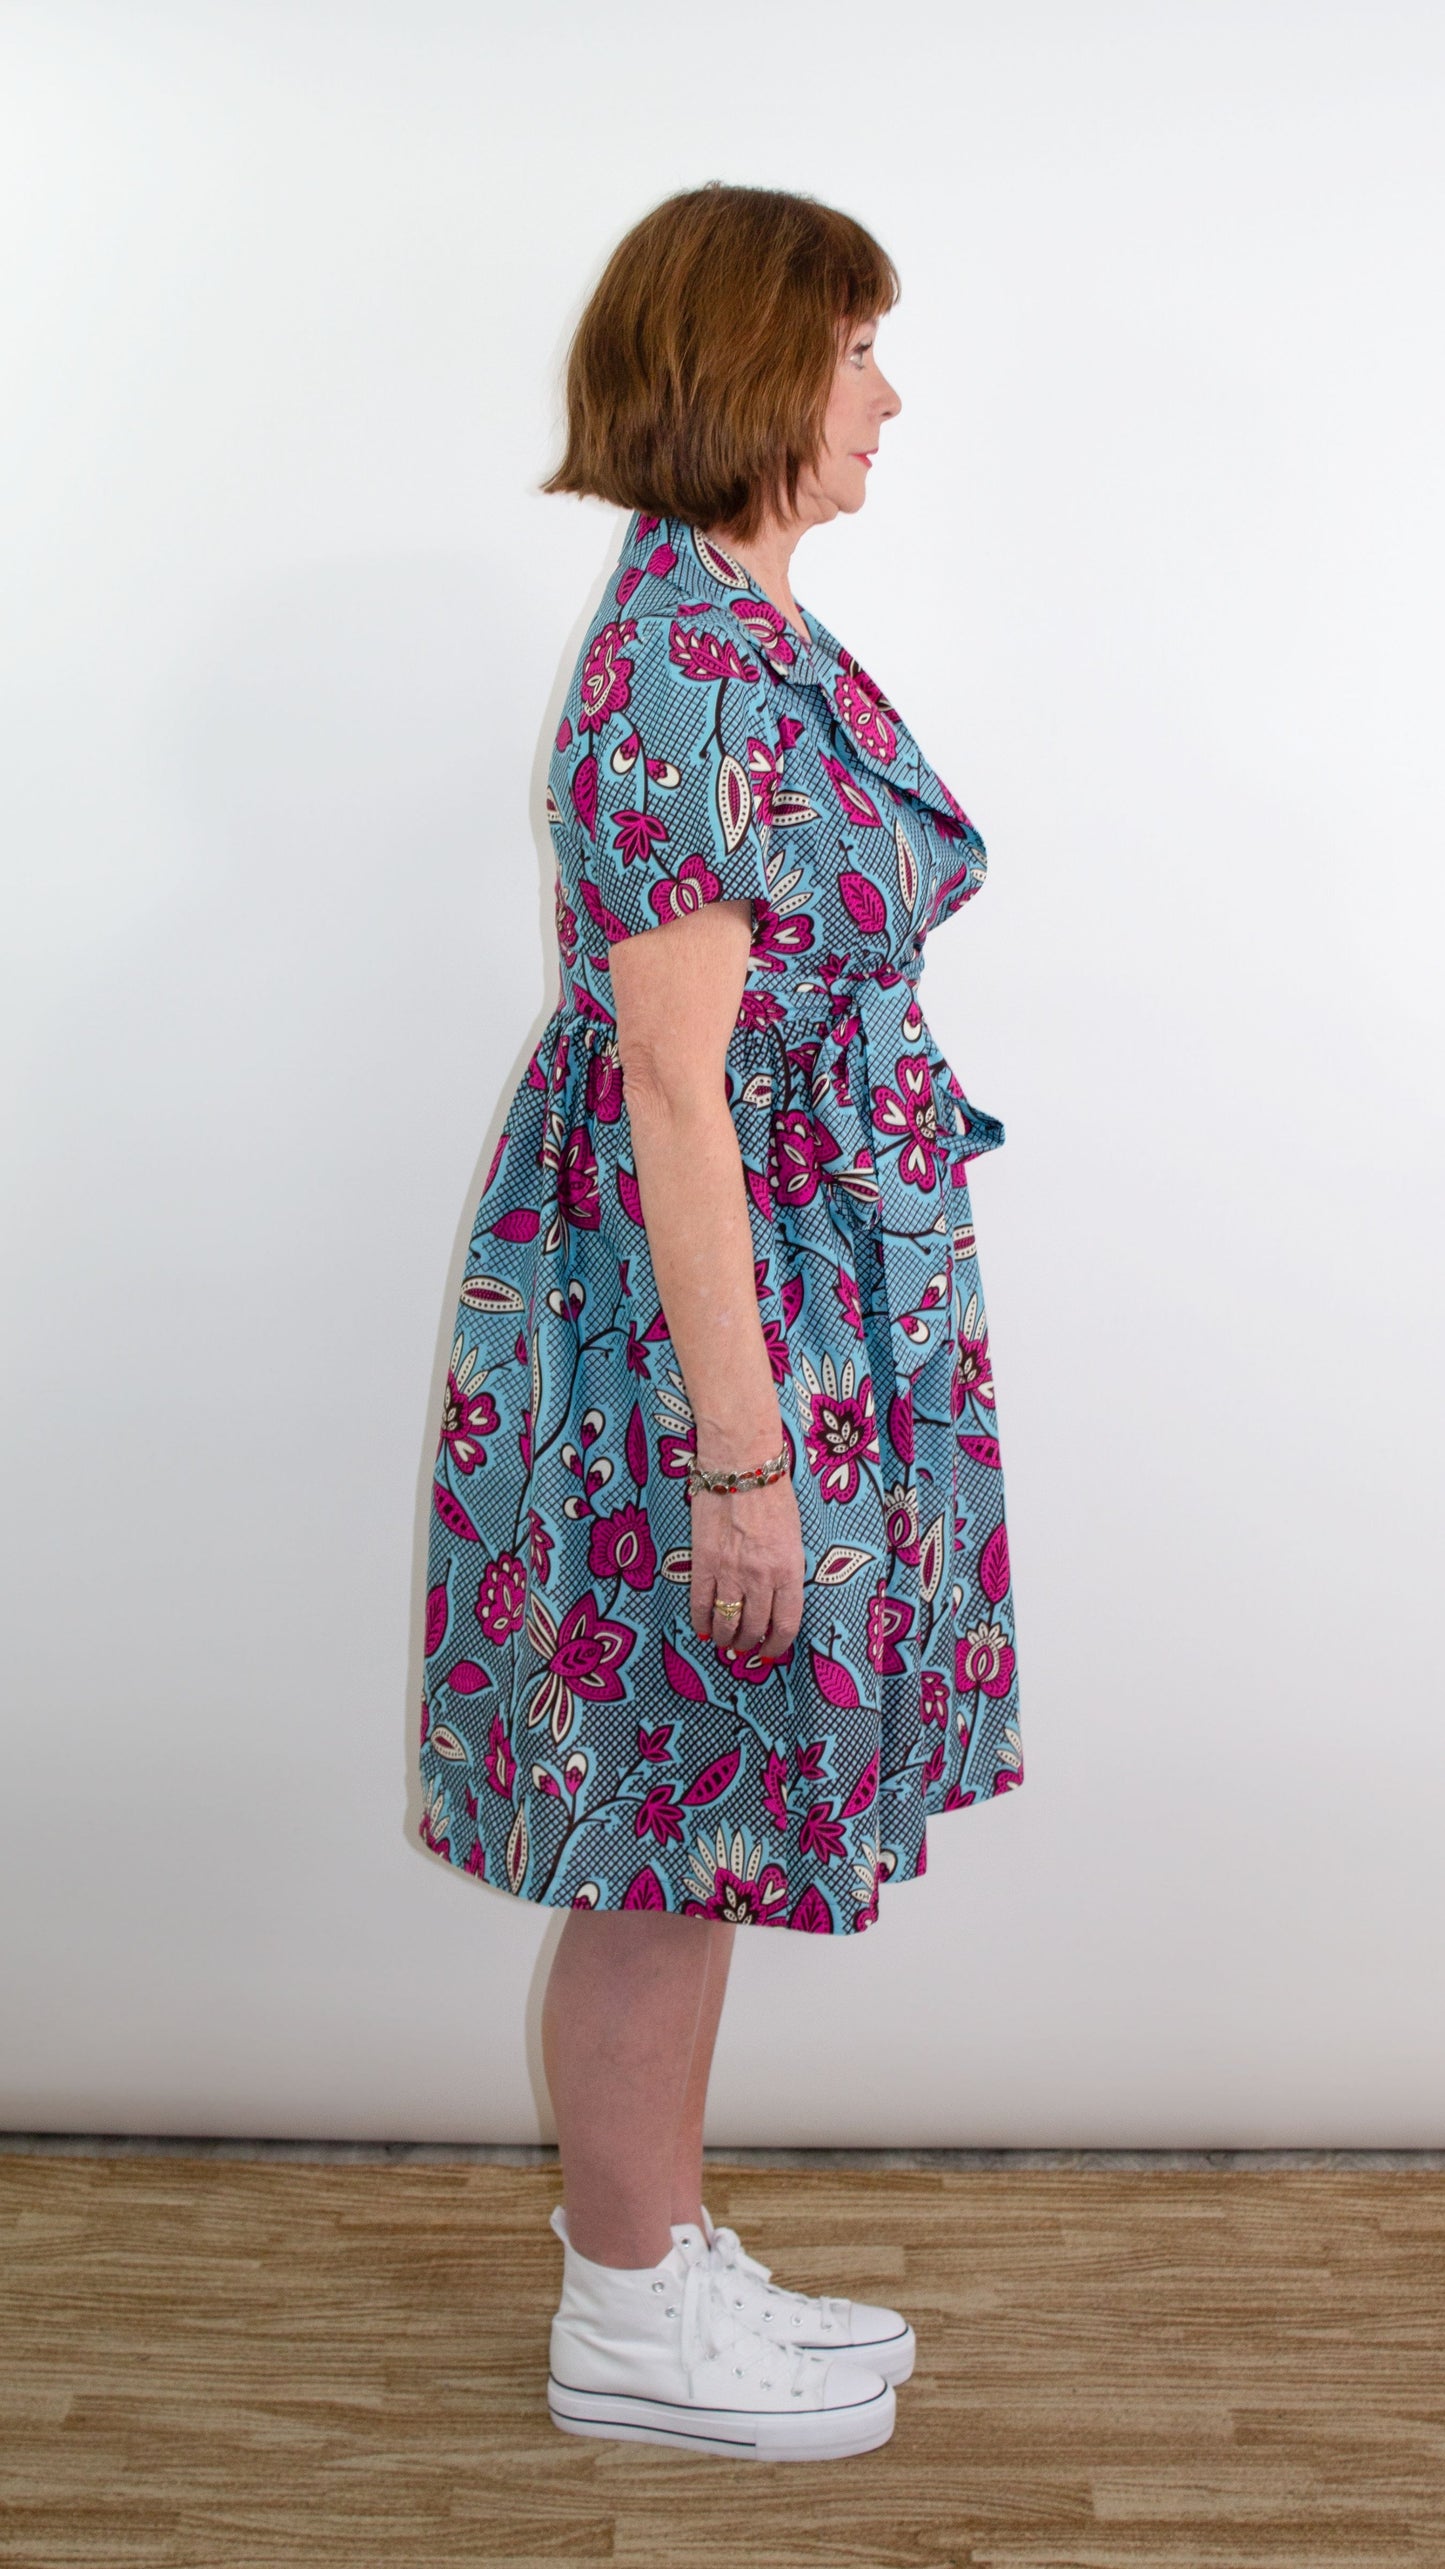 The side of a model showcasing a captivating spring/summer blue print wrap dress with pink floral elements.